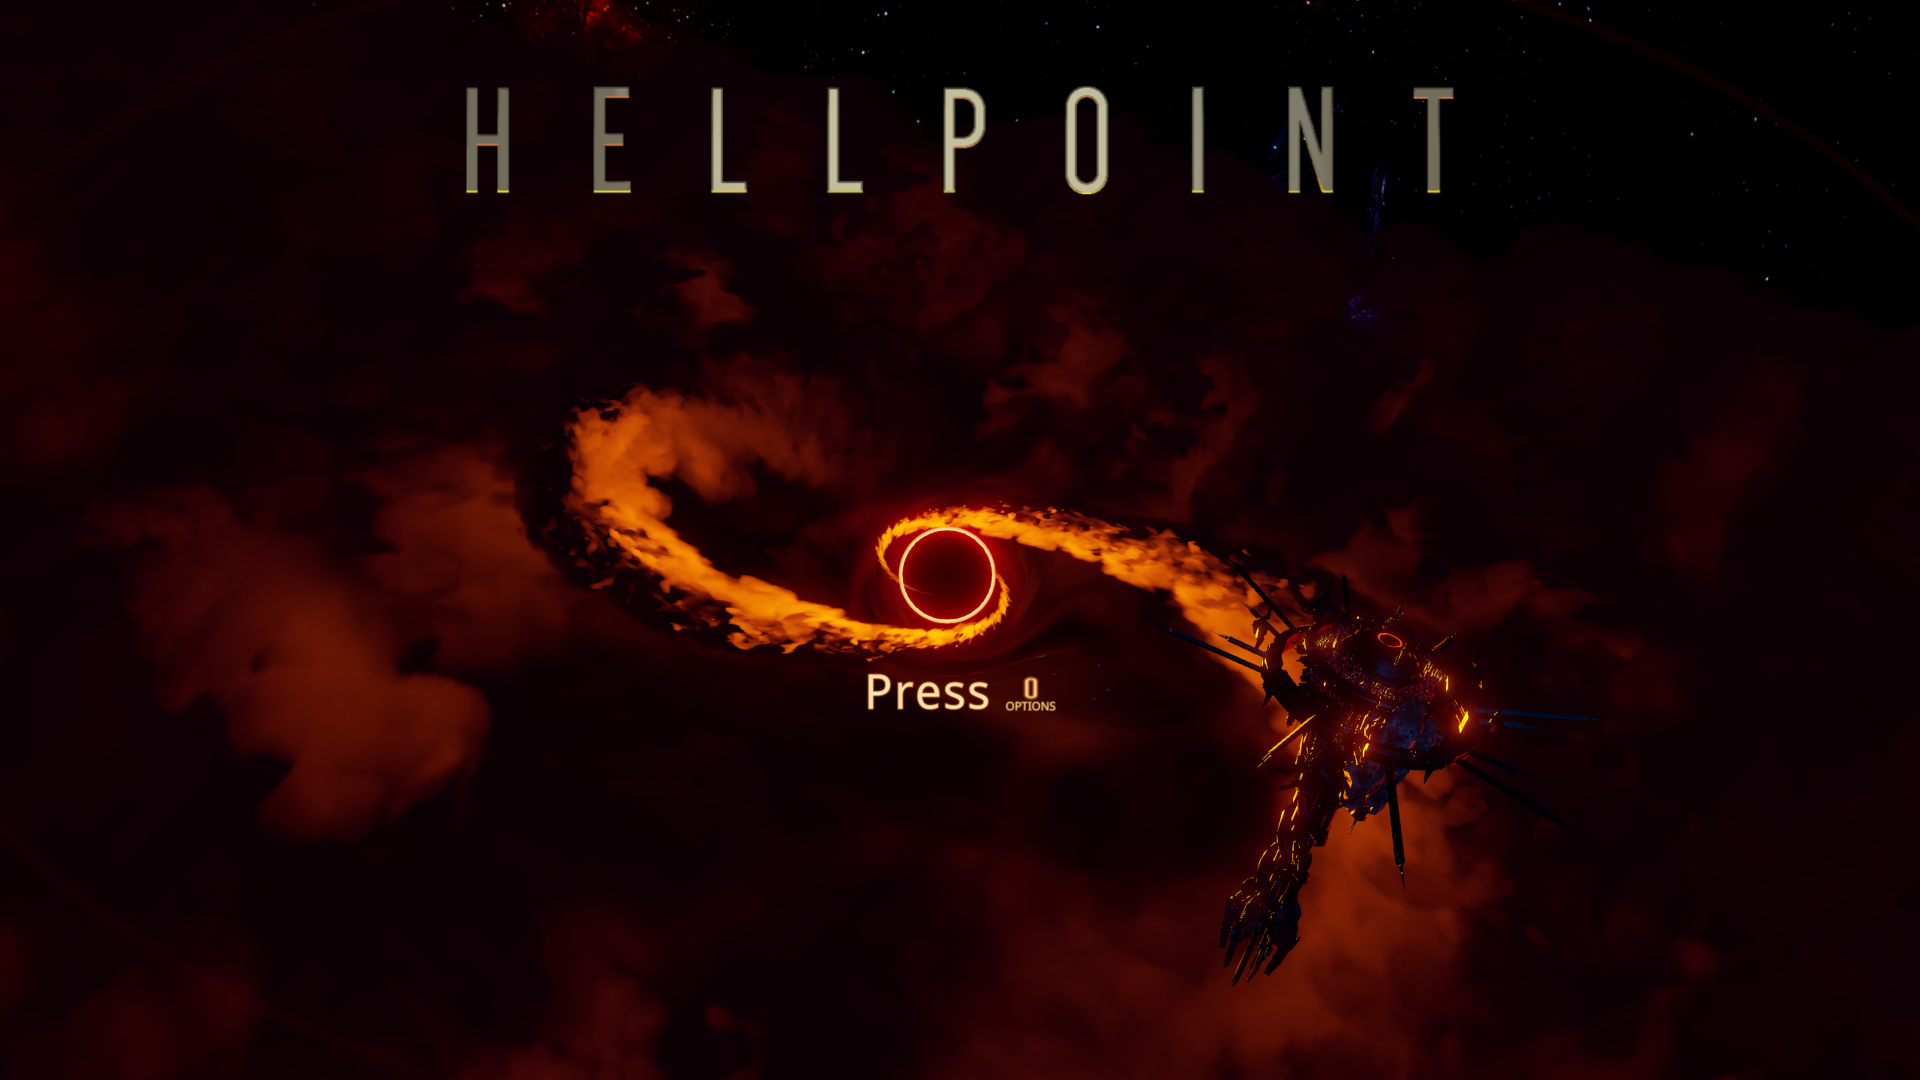 Hellpoint Review #2